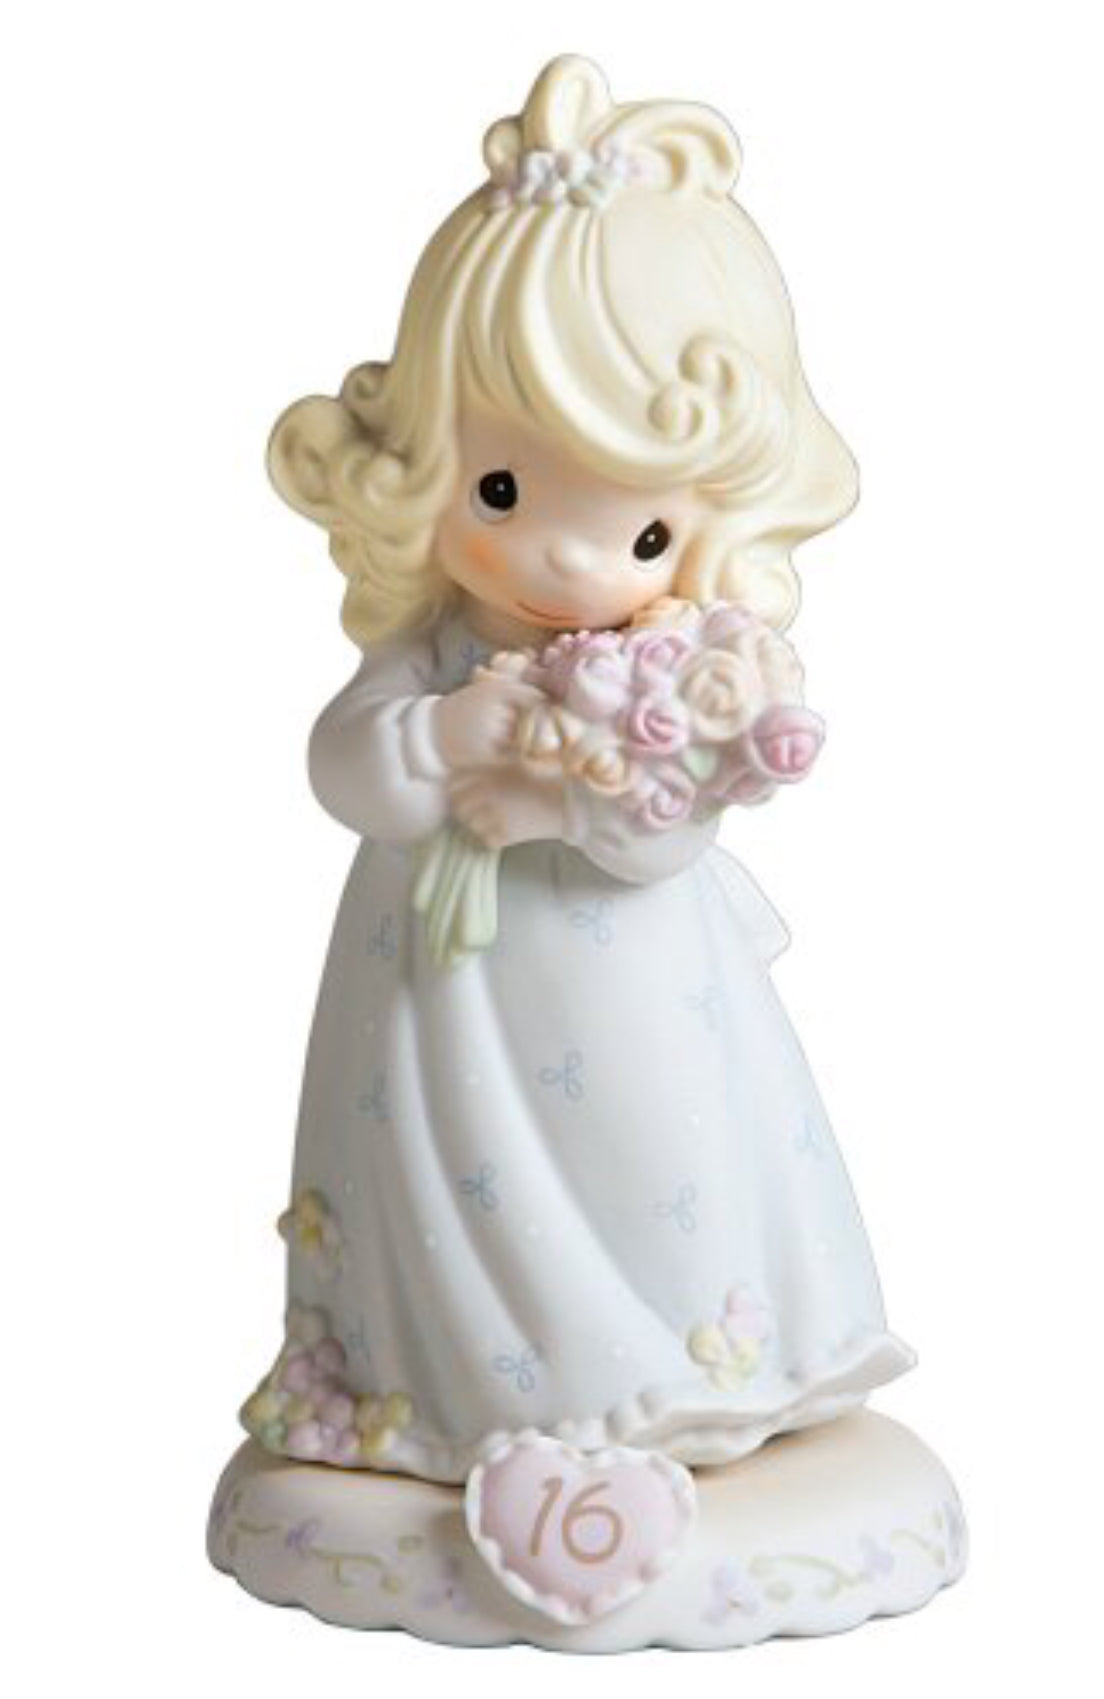 Growing in Grace Age 16 - Precious Moment Figurine